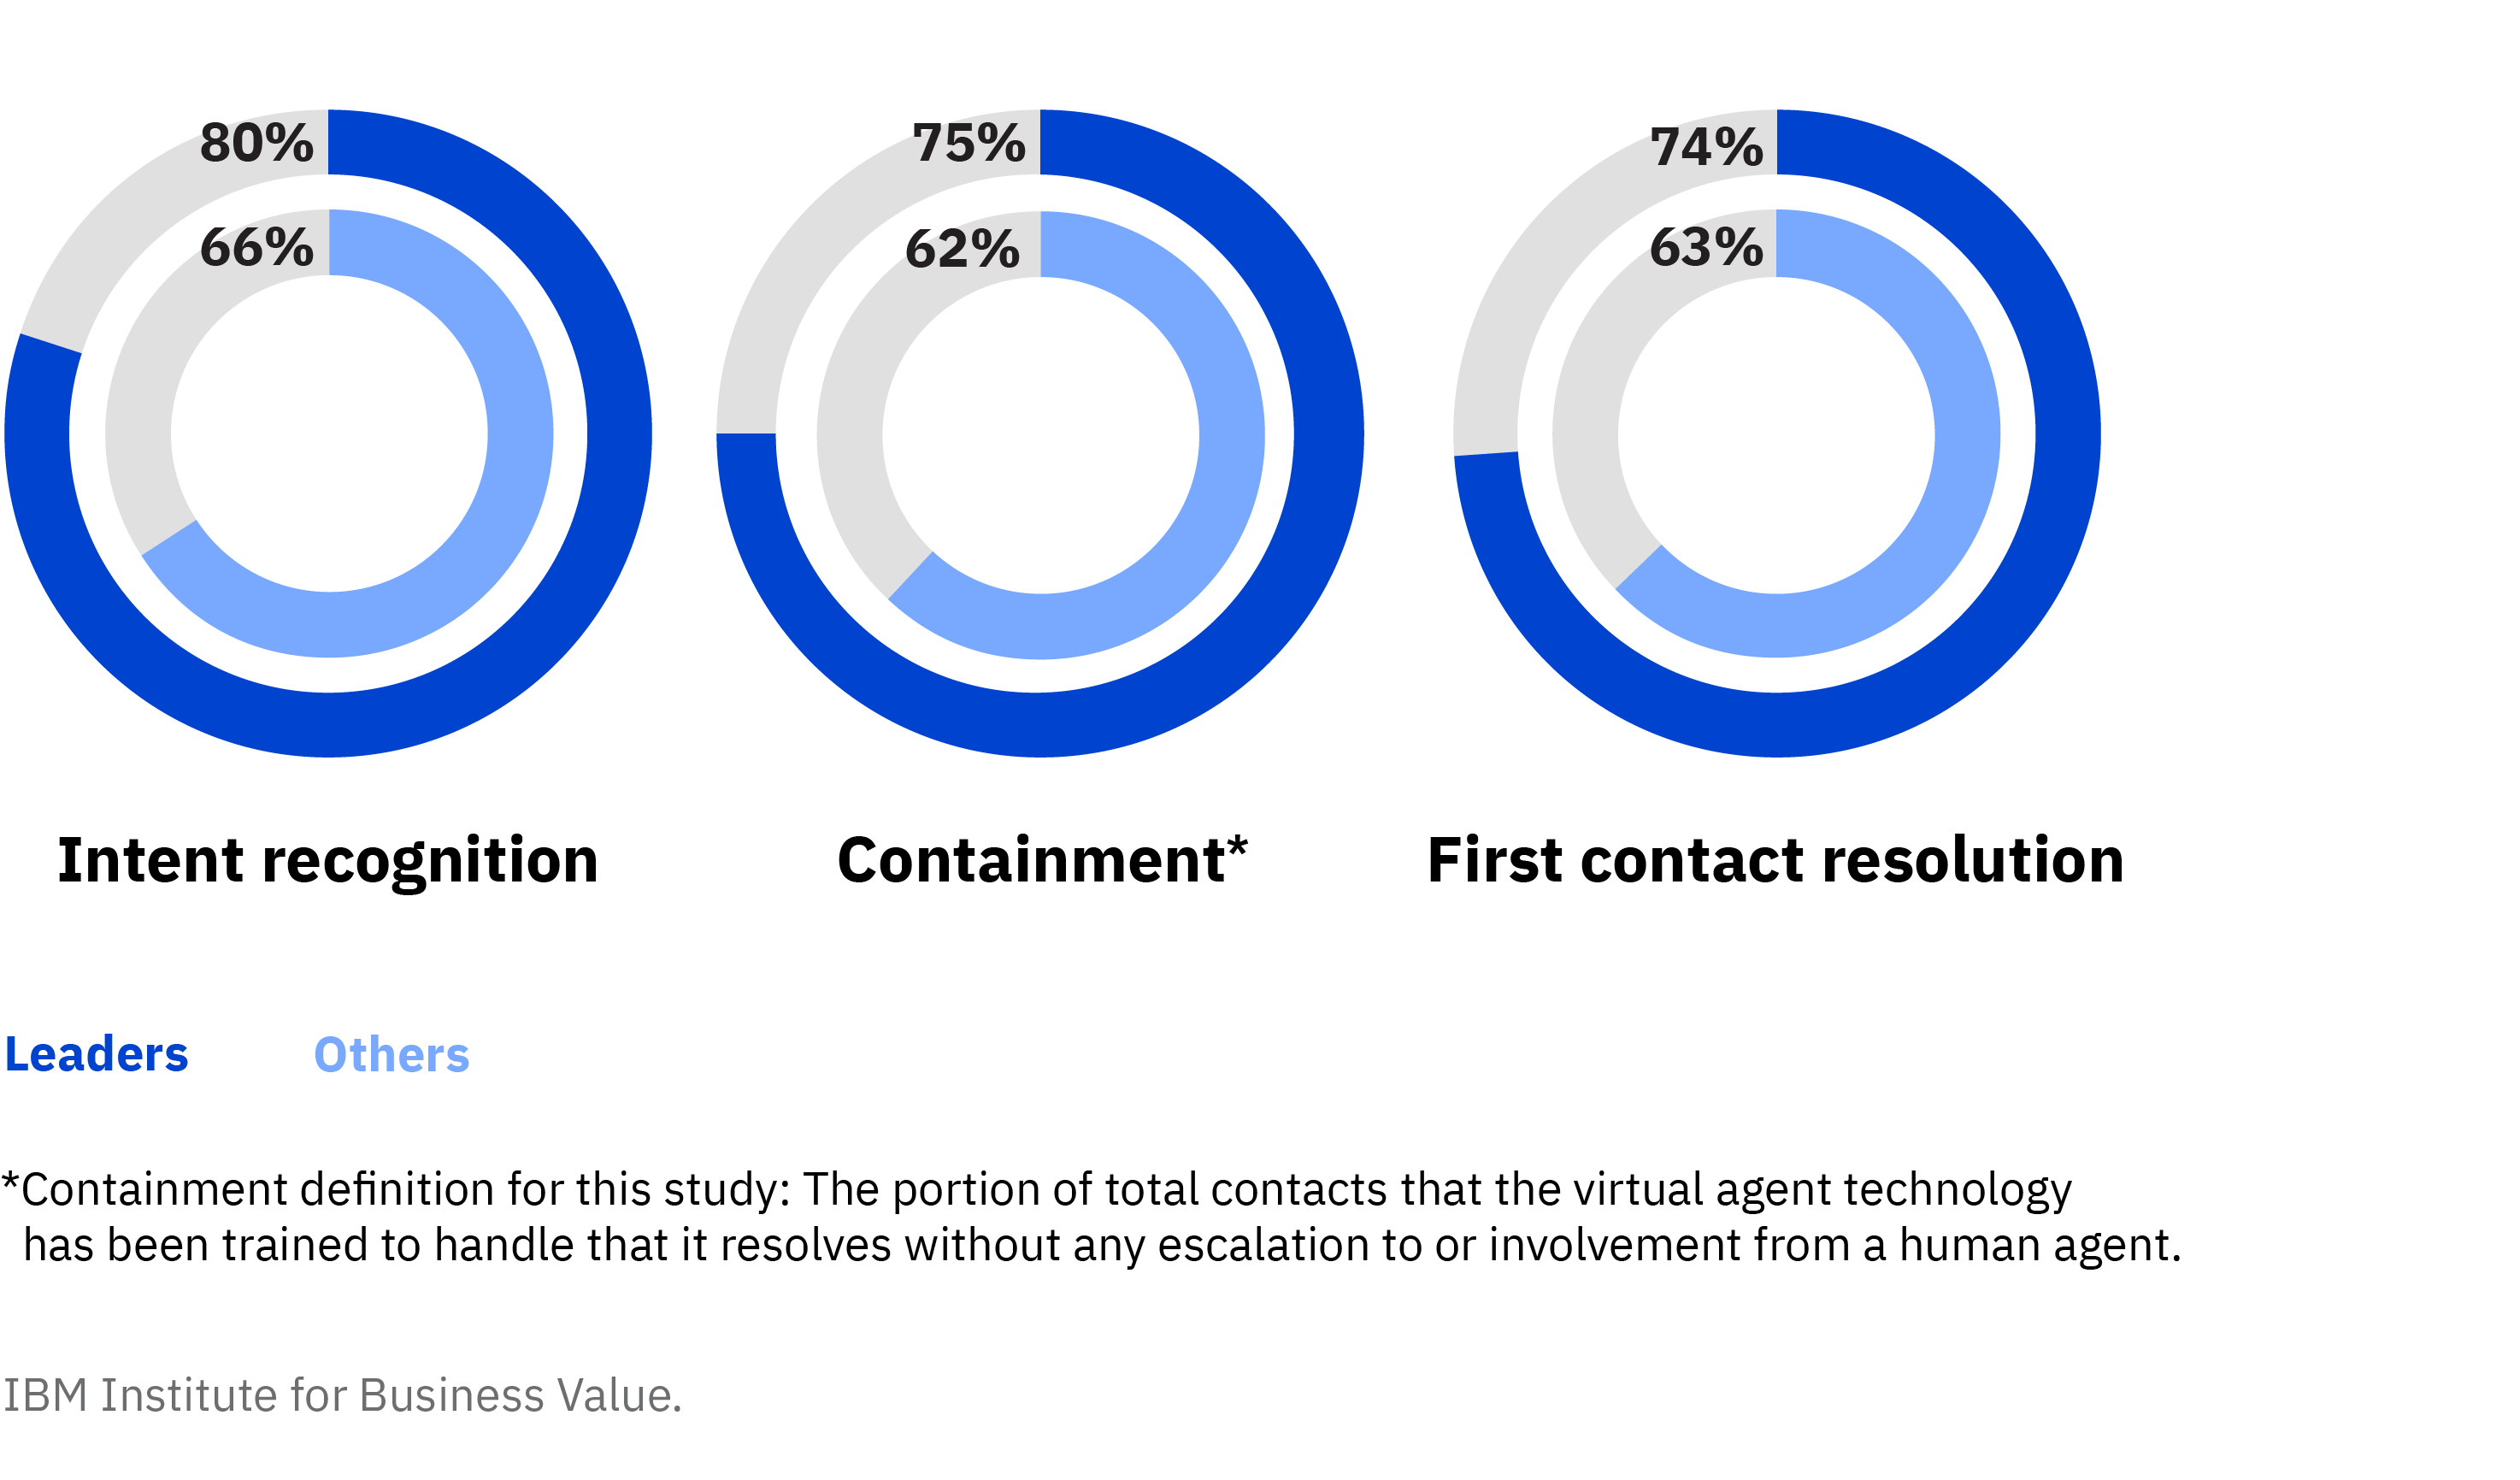 Virtual agent technology leaders outperform their peers in three key areas